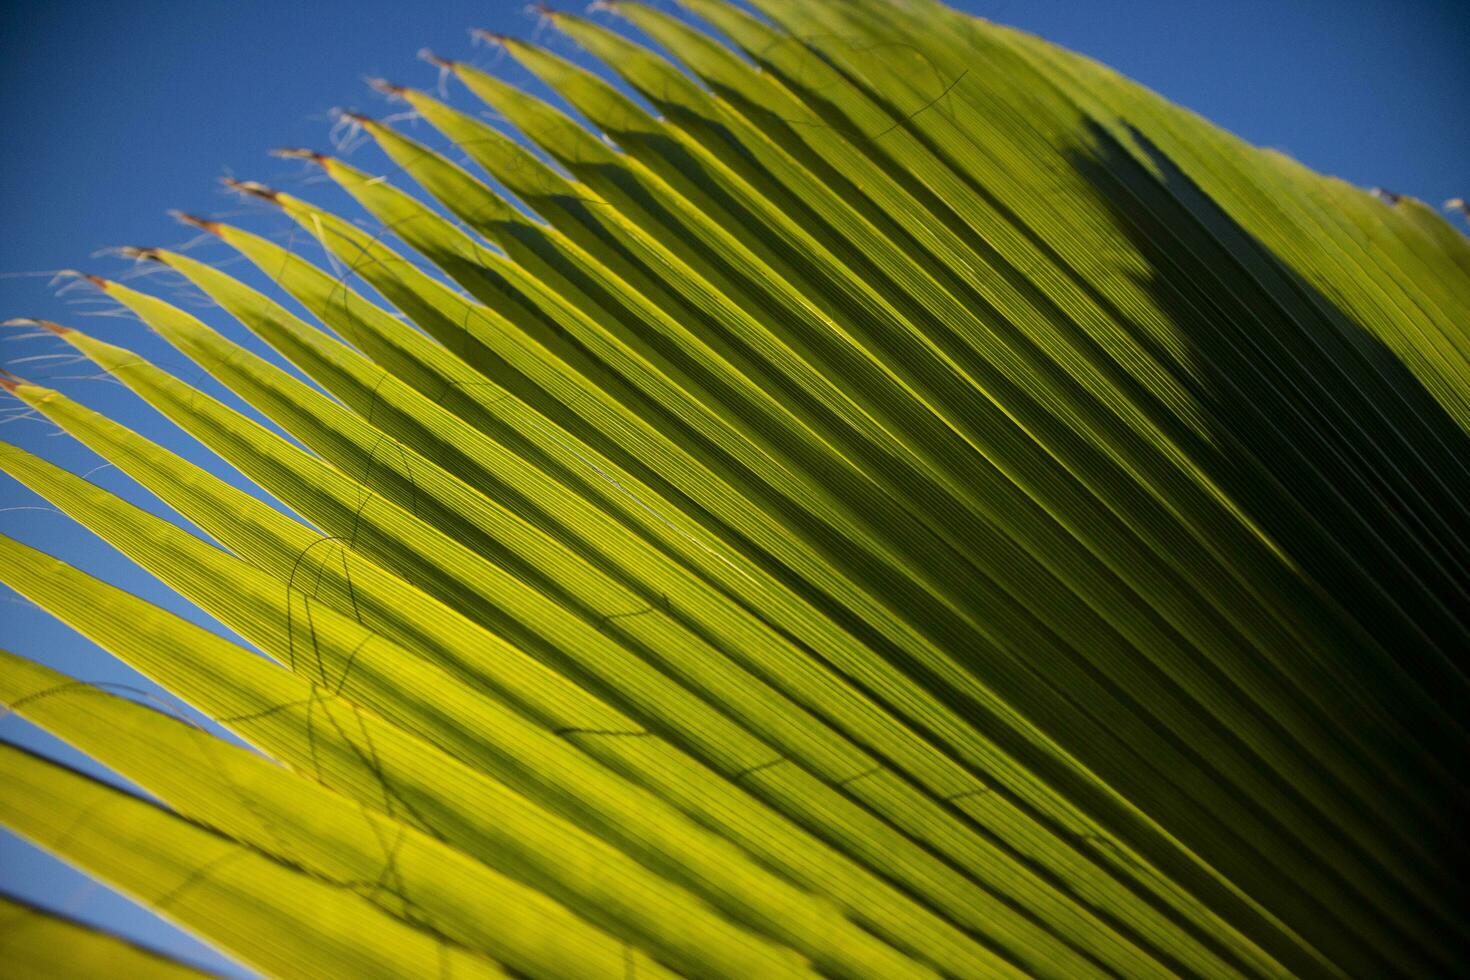 Details of the palm leaf photo